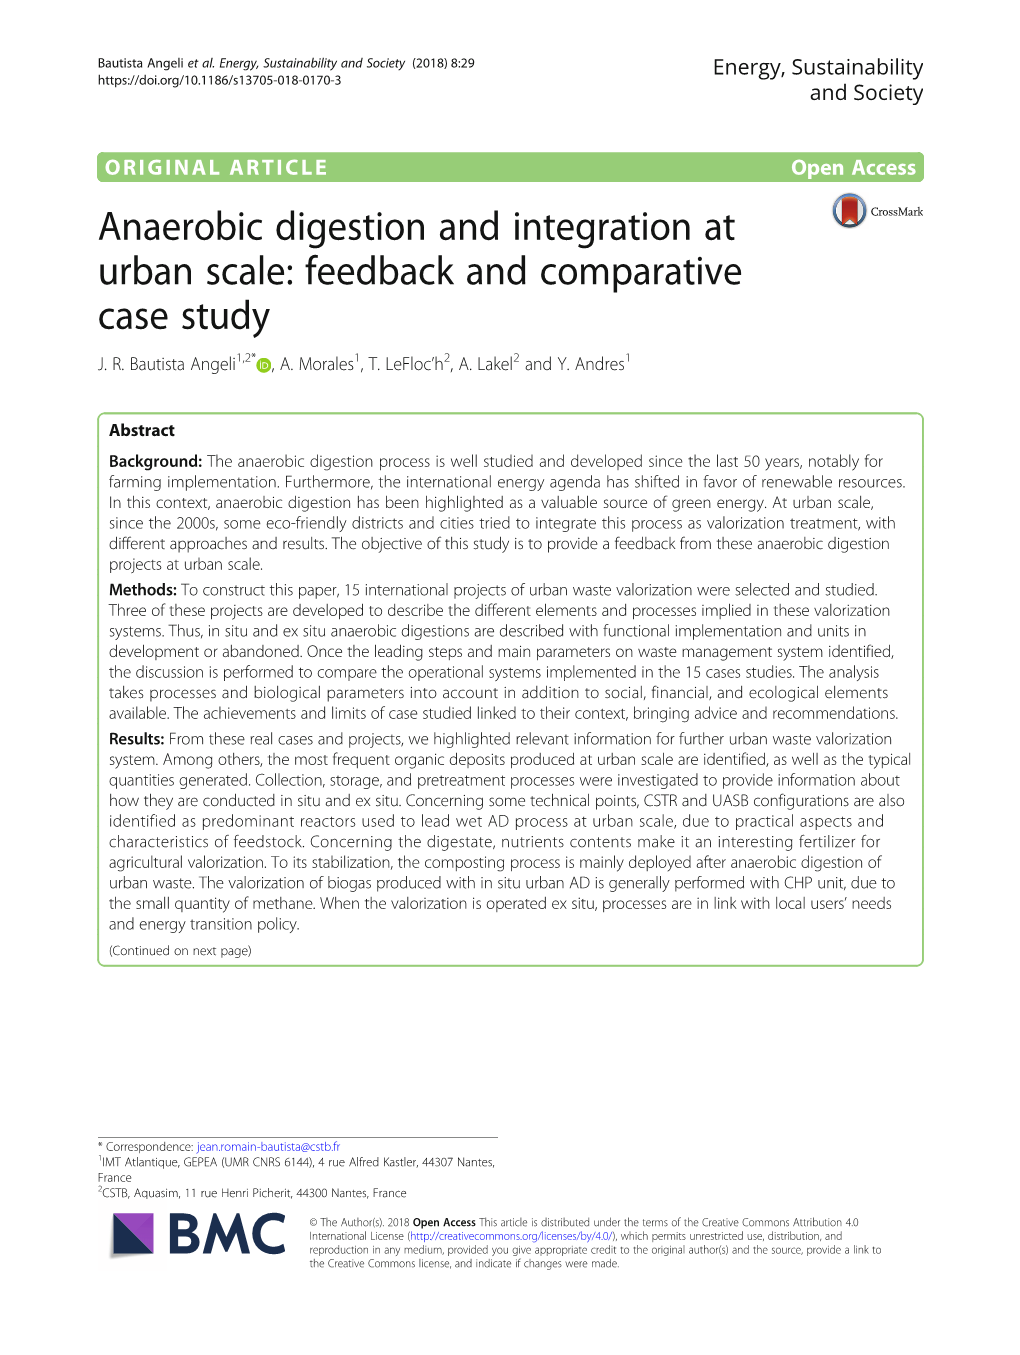 Anaerobic Digestion and Integration at Urban Scale: Feedback and Comparative Case Study J